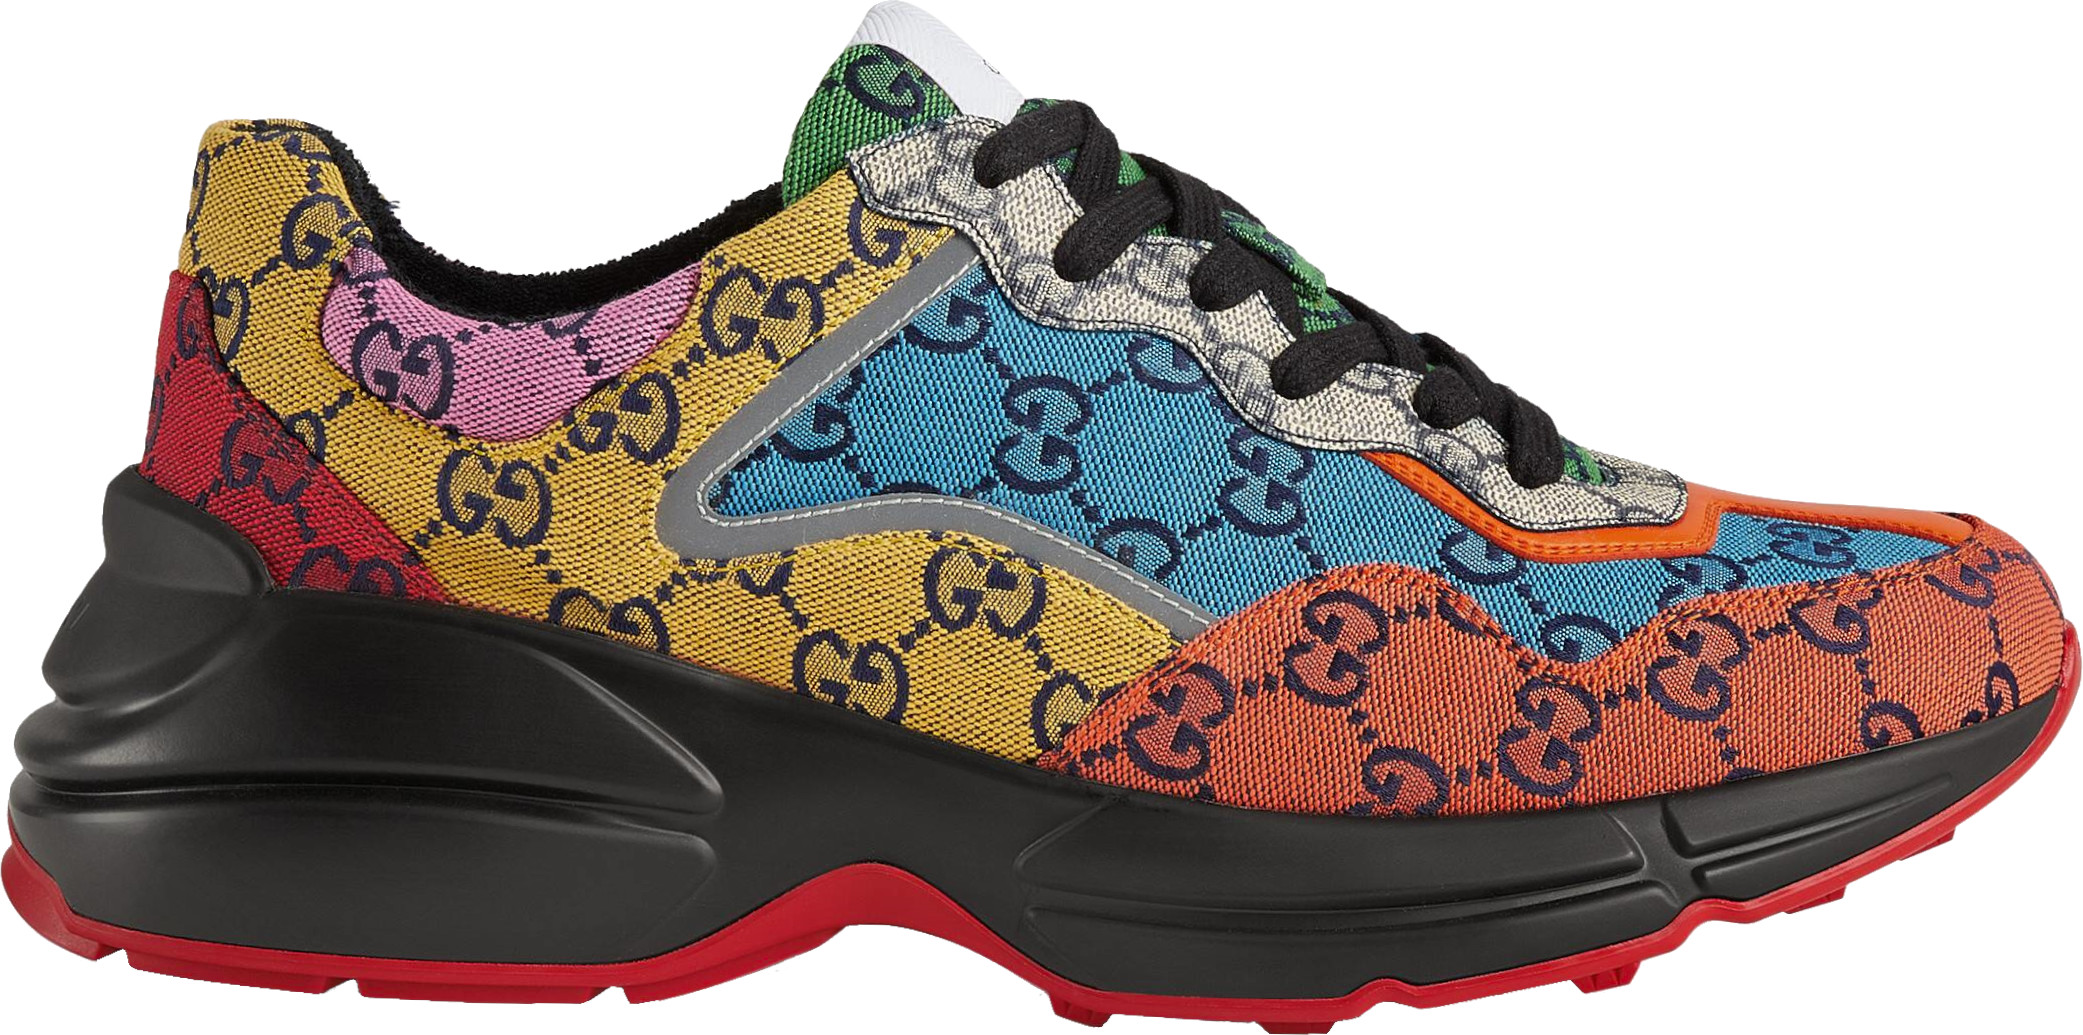 Gucci Rhyton Black Sneakers With Multicolored Logo | vlr.eng.br